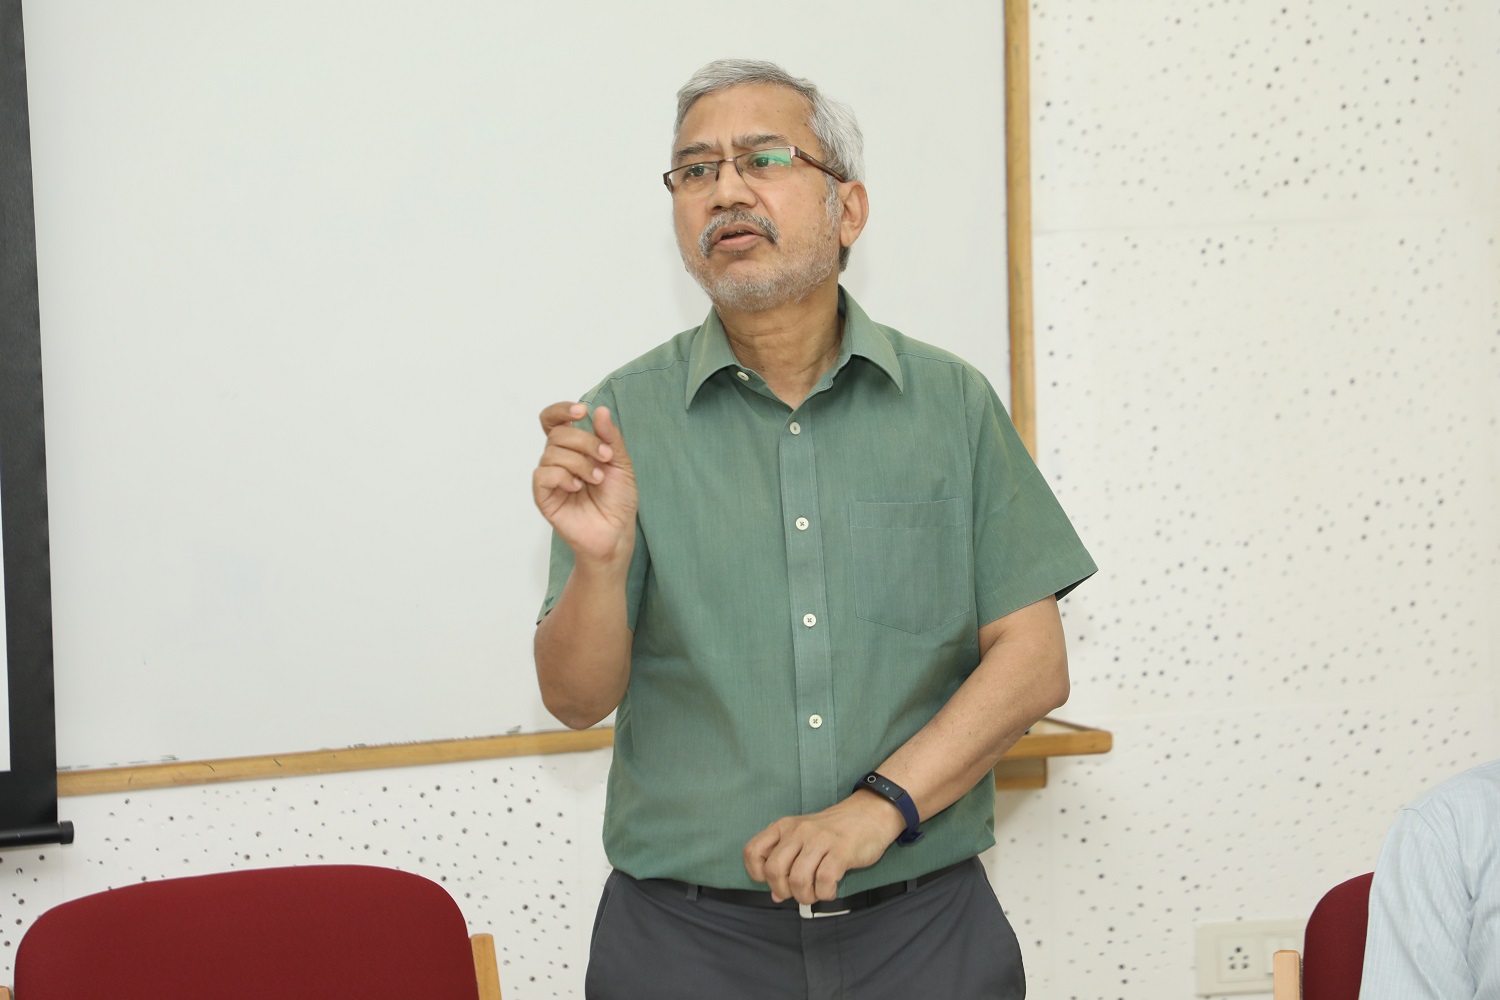 Describing the NSR Pre-doc Fellowship as “unique”, Professor Rahul De, Dean Programmes, urged the students to work with their mentors, choose their courses carefully, and develop a strong focus as the rigor of the programme is high.